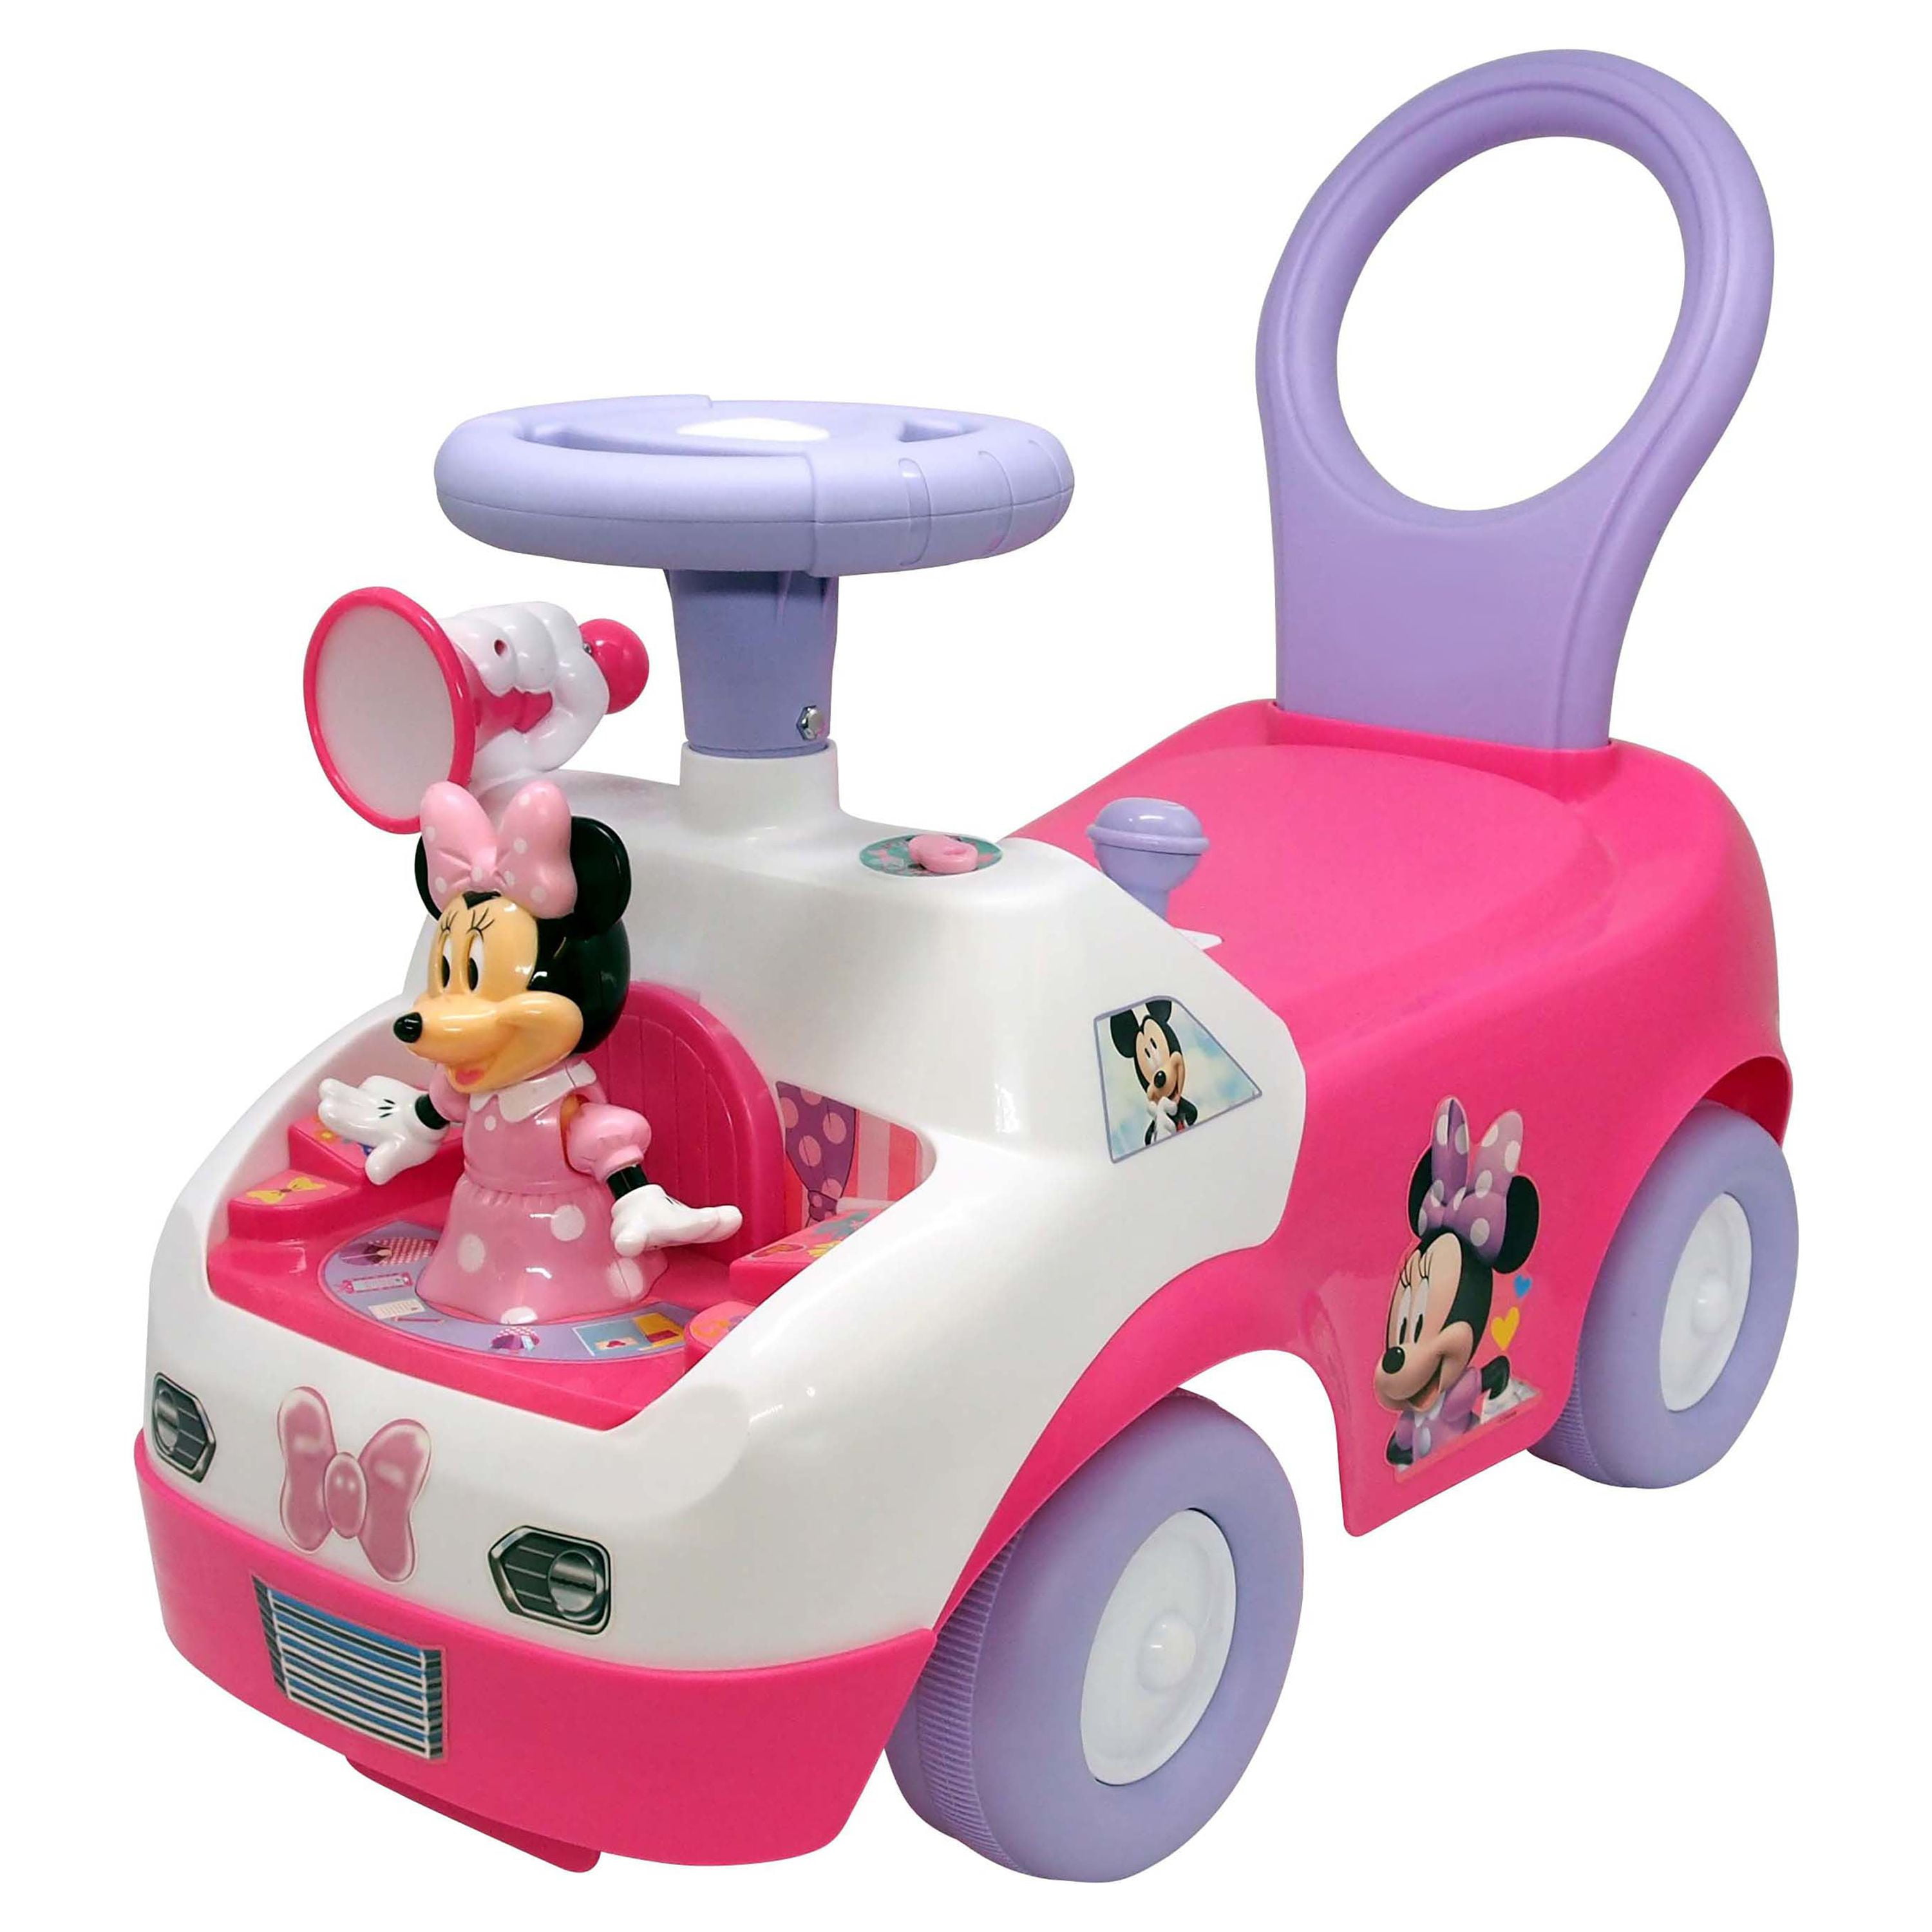 Interactive Dancing Sounds Activity Mouse Kiddieland Minnie with Ride-On Car